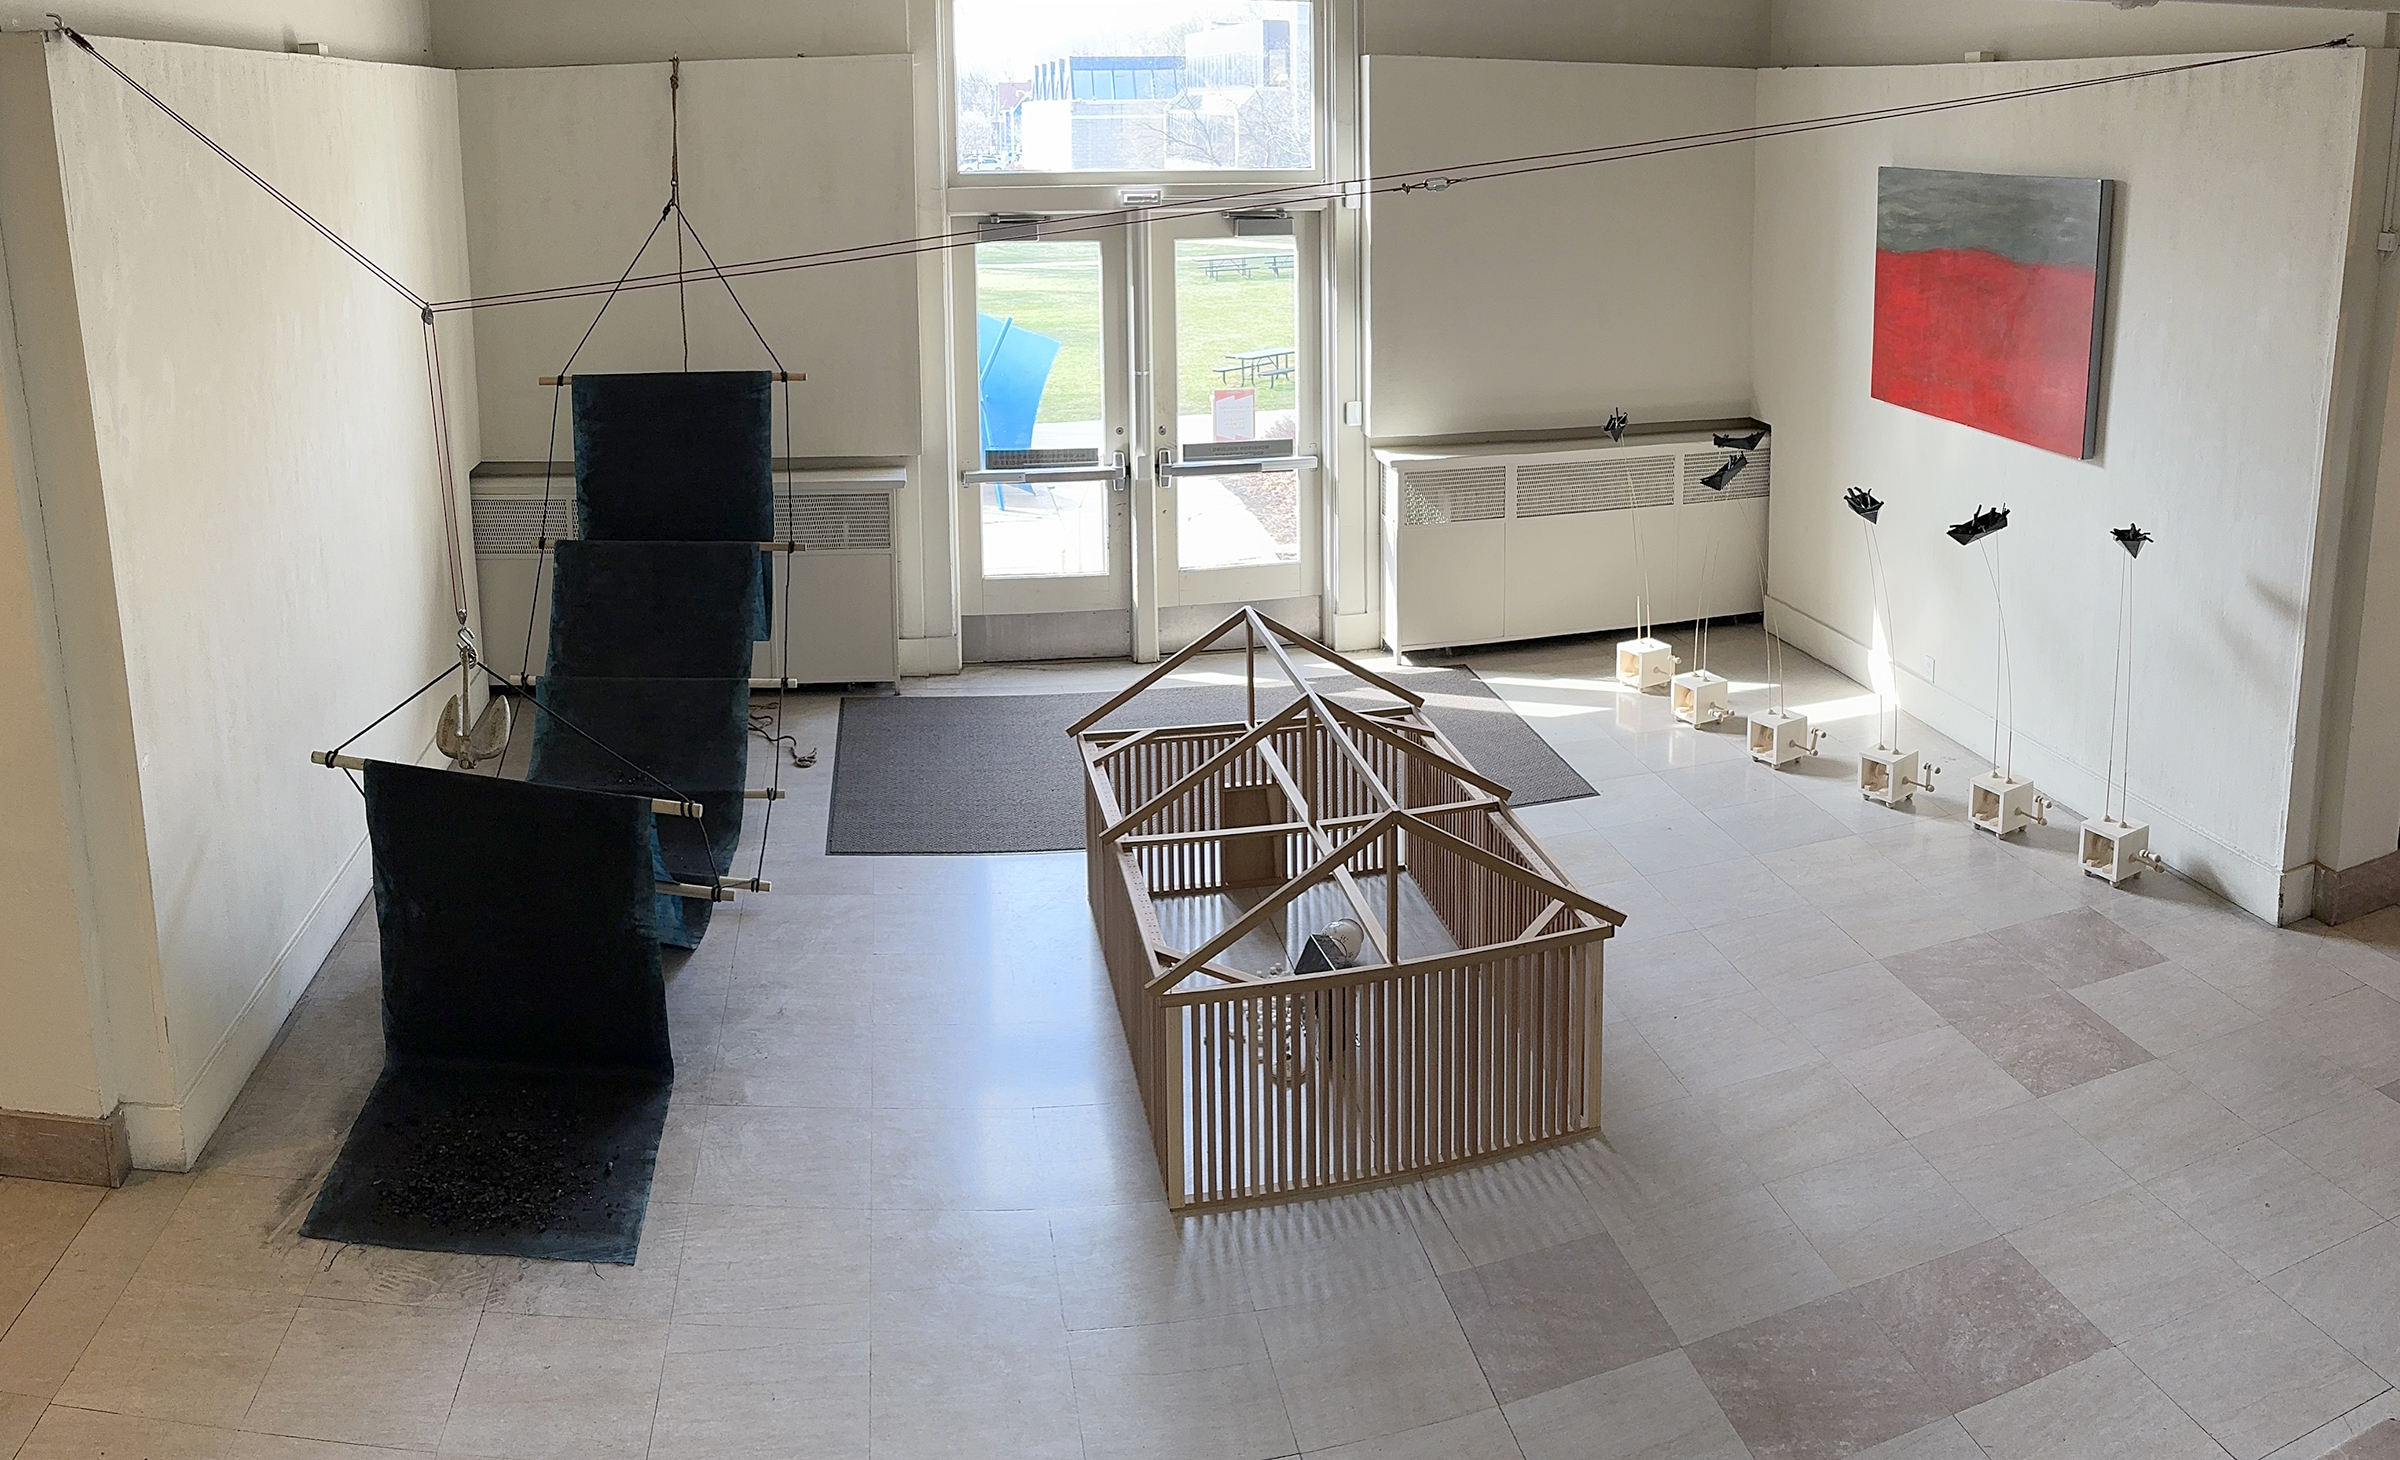 Image of Victor's thesis installation in the Morrison Building. Included are sculptures that are in part made of wood, paper, and charcoal. There is a grey and red painting on the far wall.